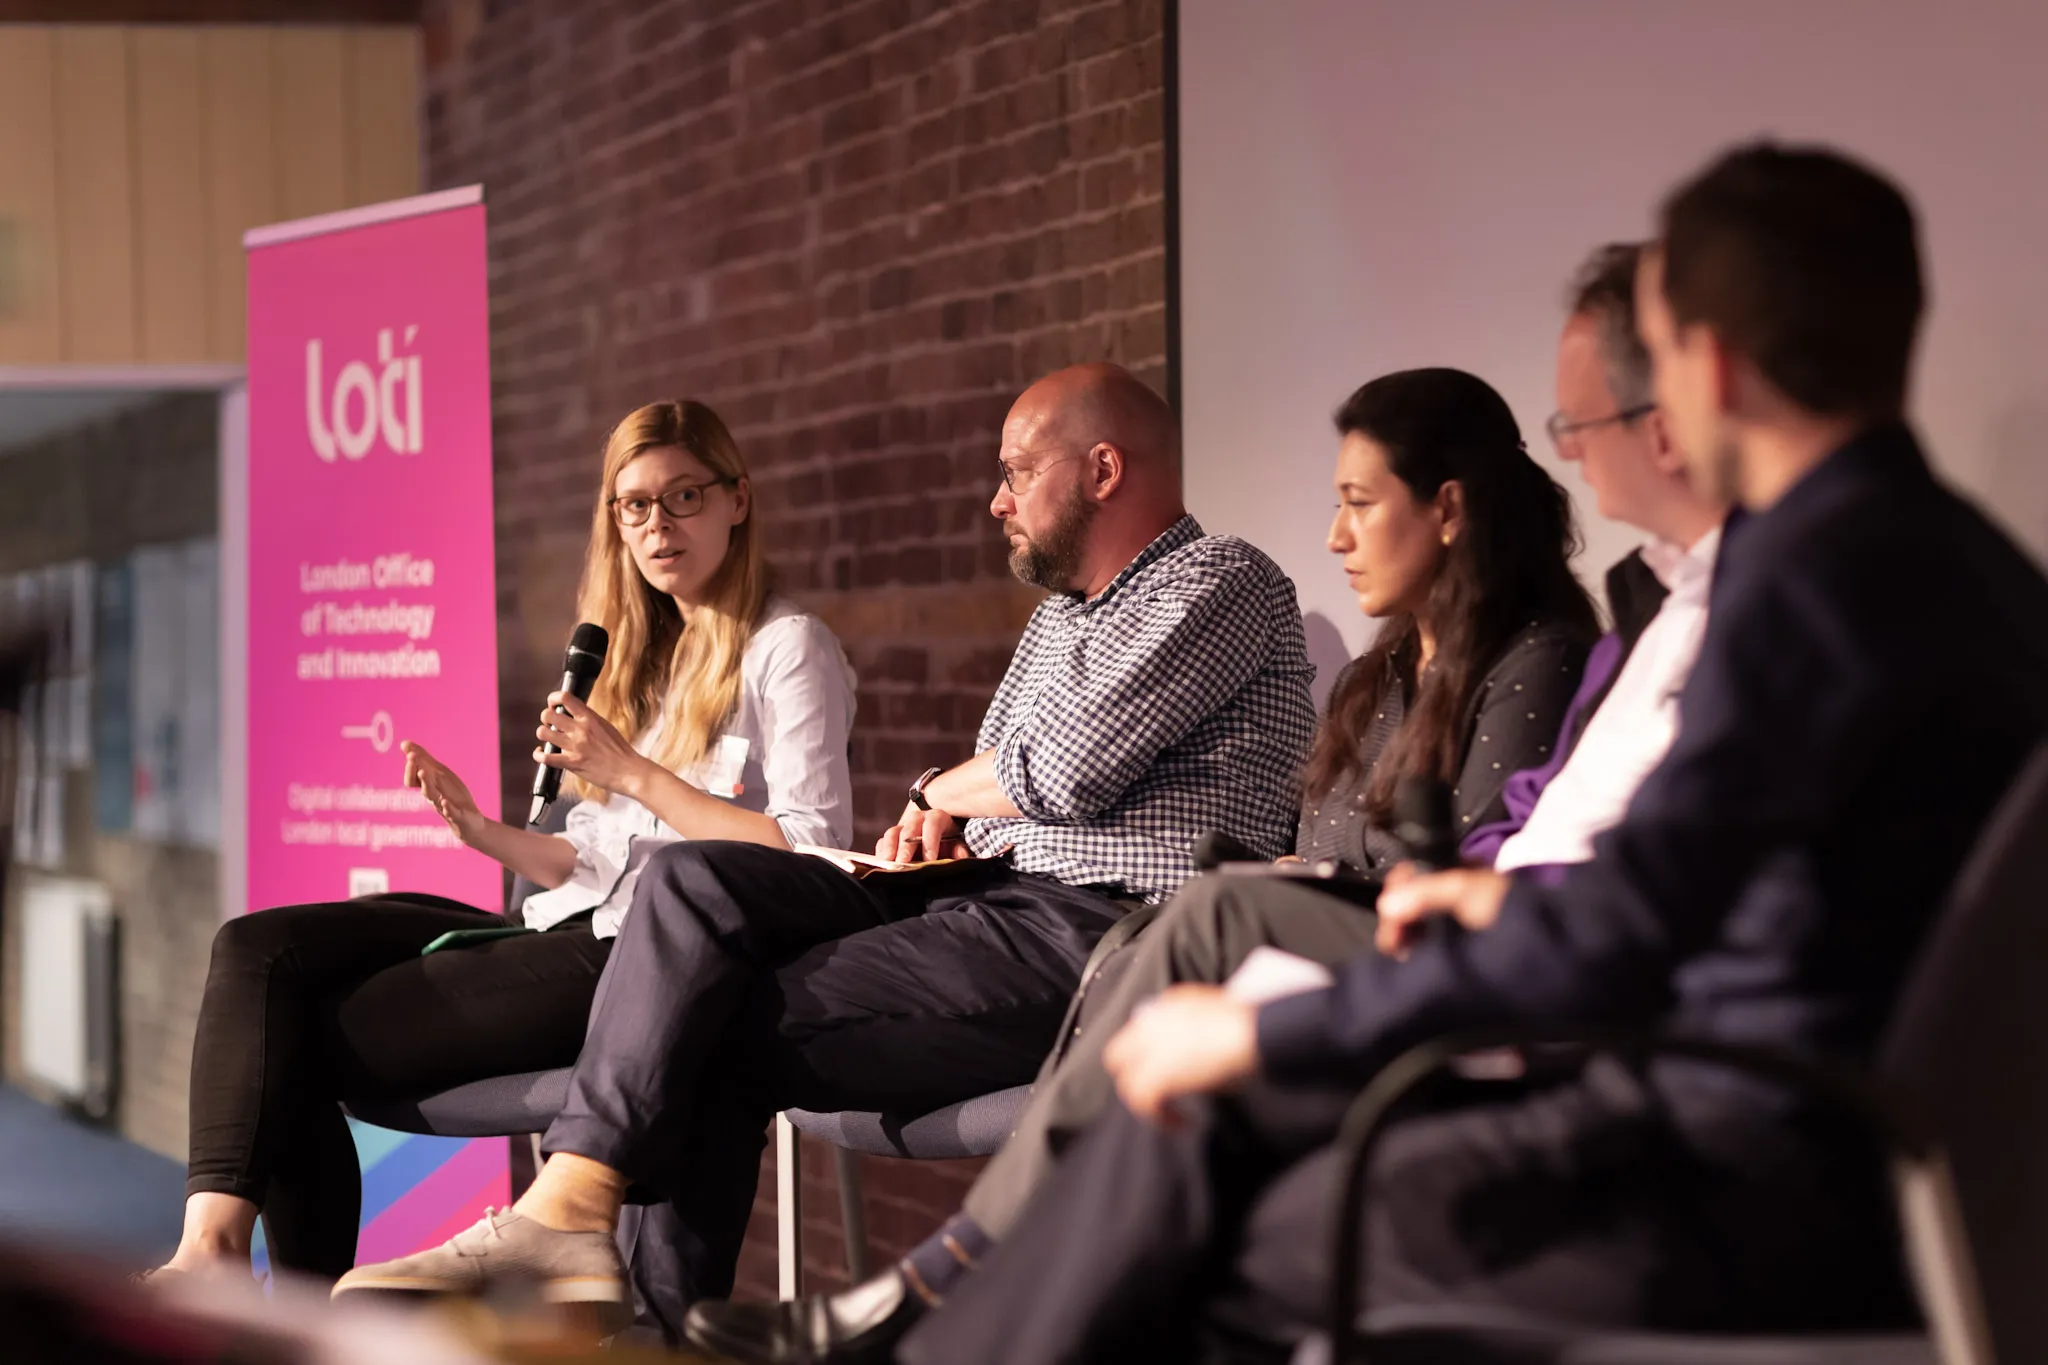 Abi Wood, CEO of Age UK, Tim Stranack, Founder of Community Fibre, and Opama Khan, Croydon’s Head of Digital Services, Access & Reach and Theo Blackwell, Chief Digital Officer for London on the panel.